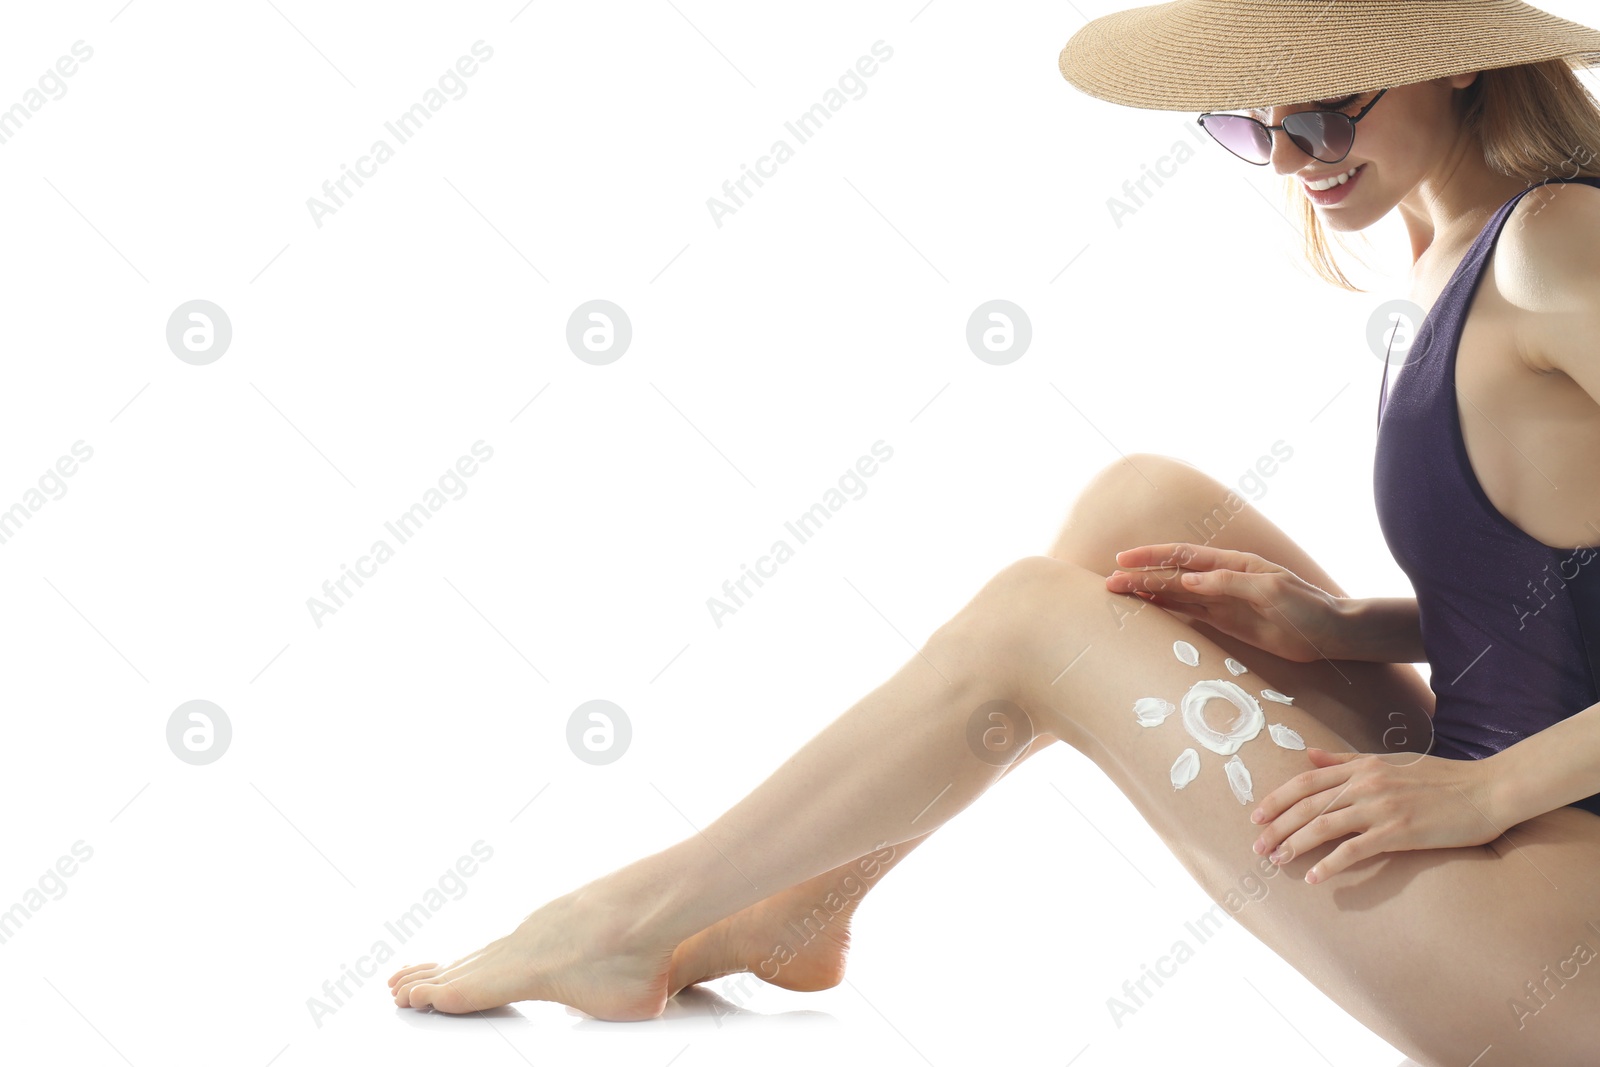 Photo of Woman applying sun protection cream on leg against white background